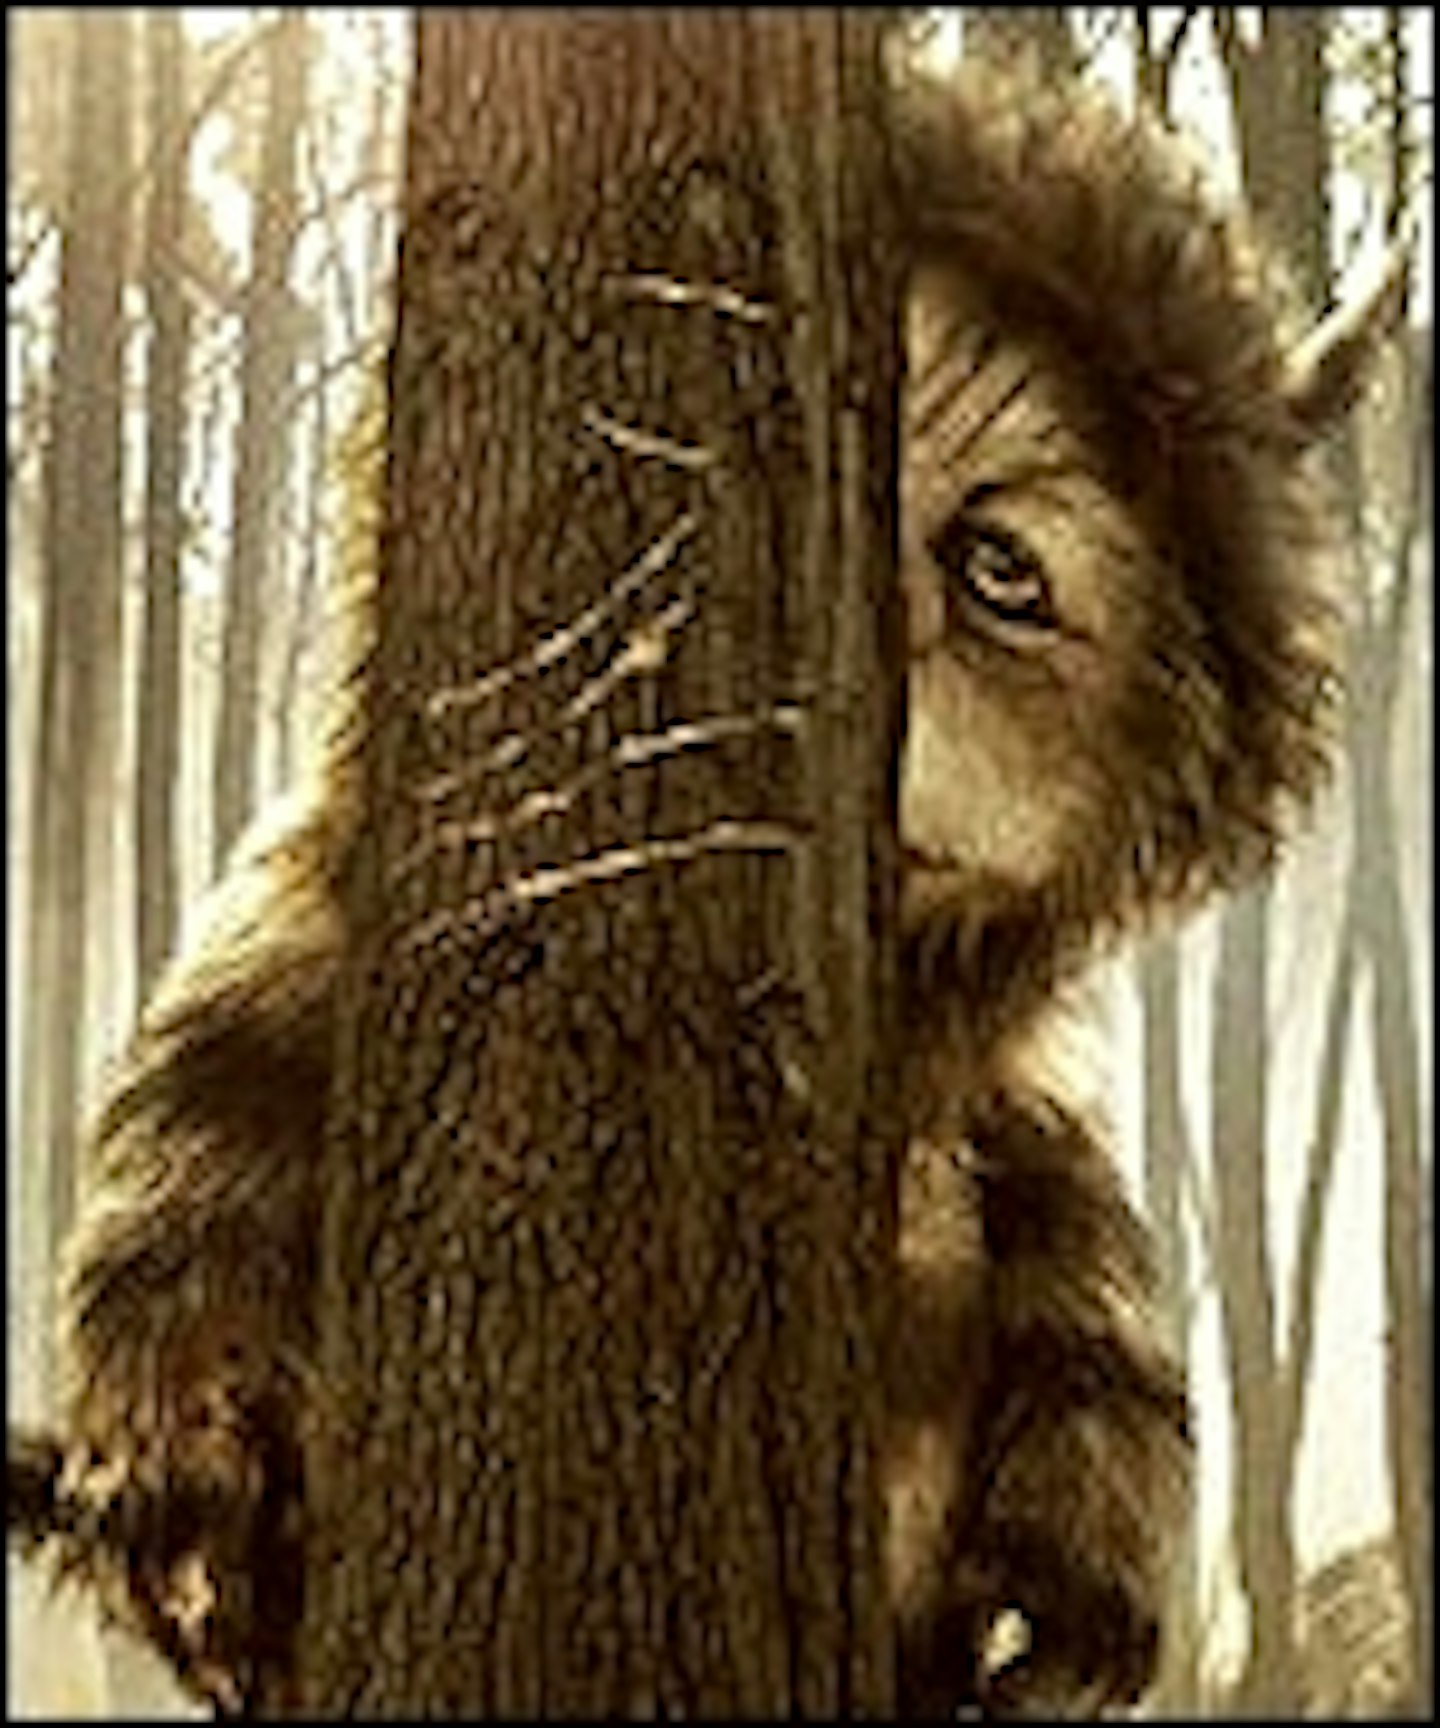 New Where The Wild Things Are Poster